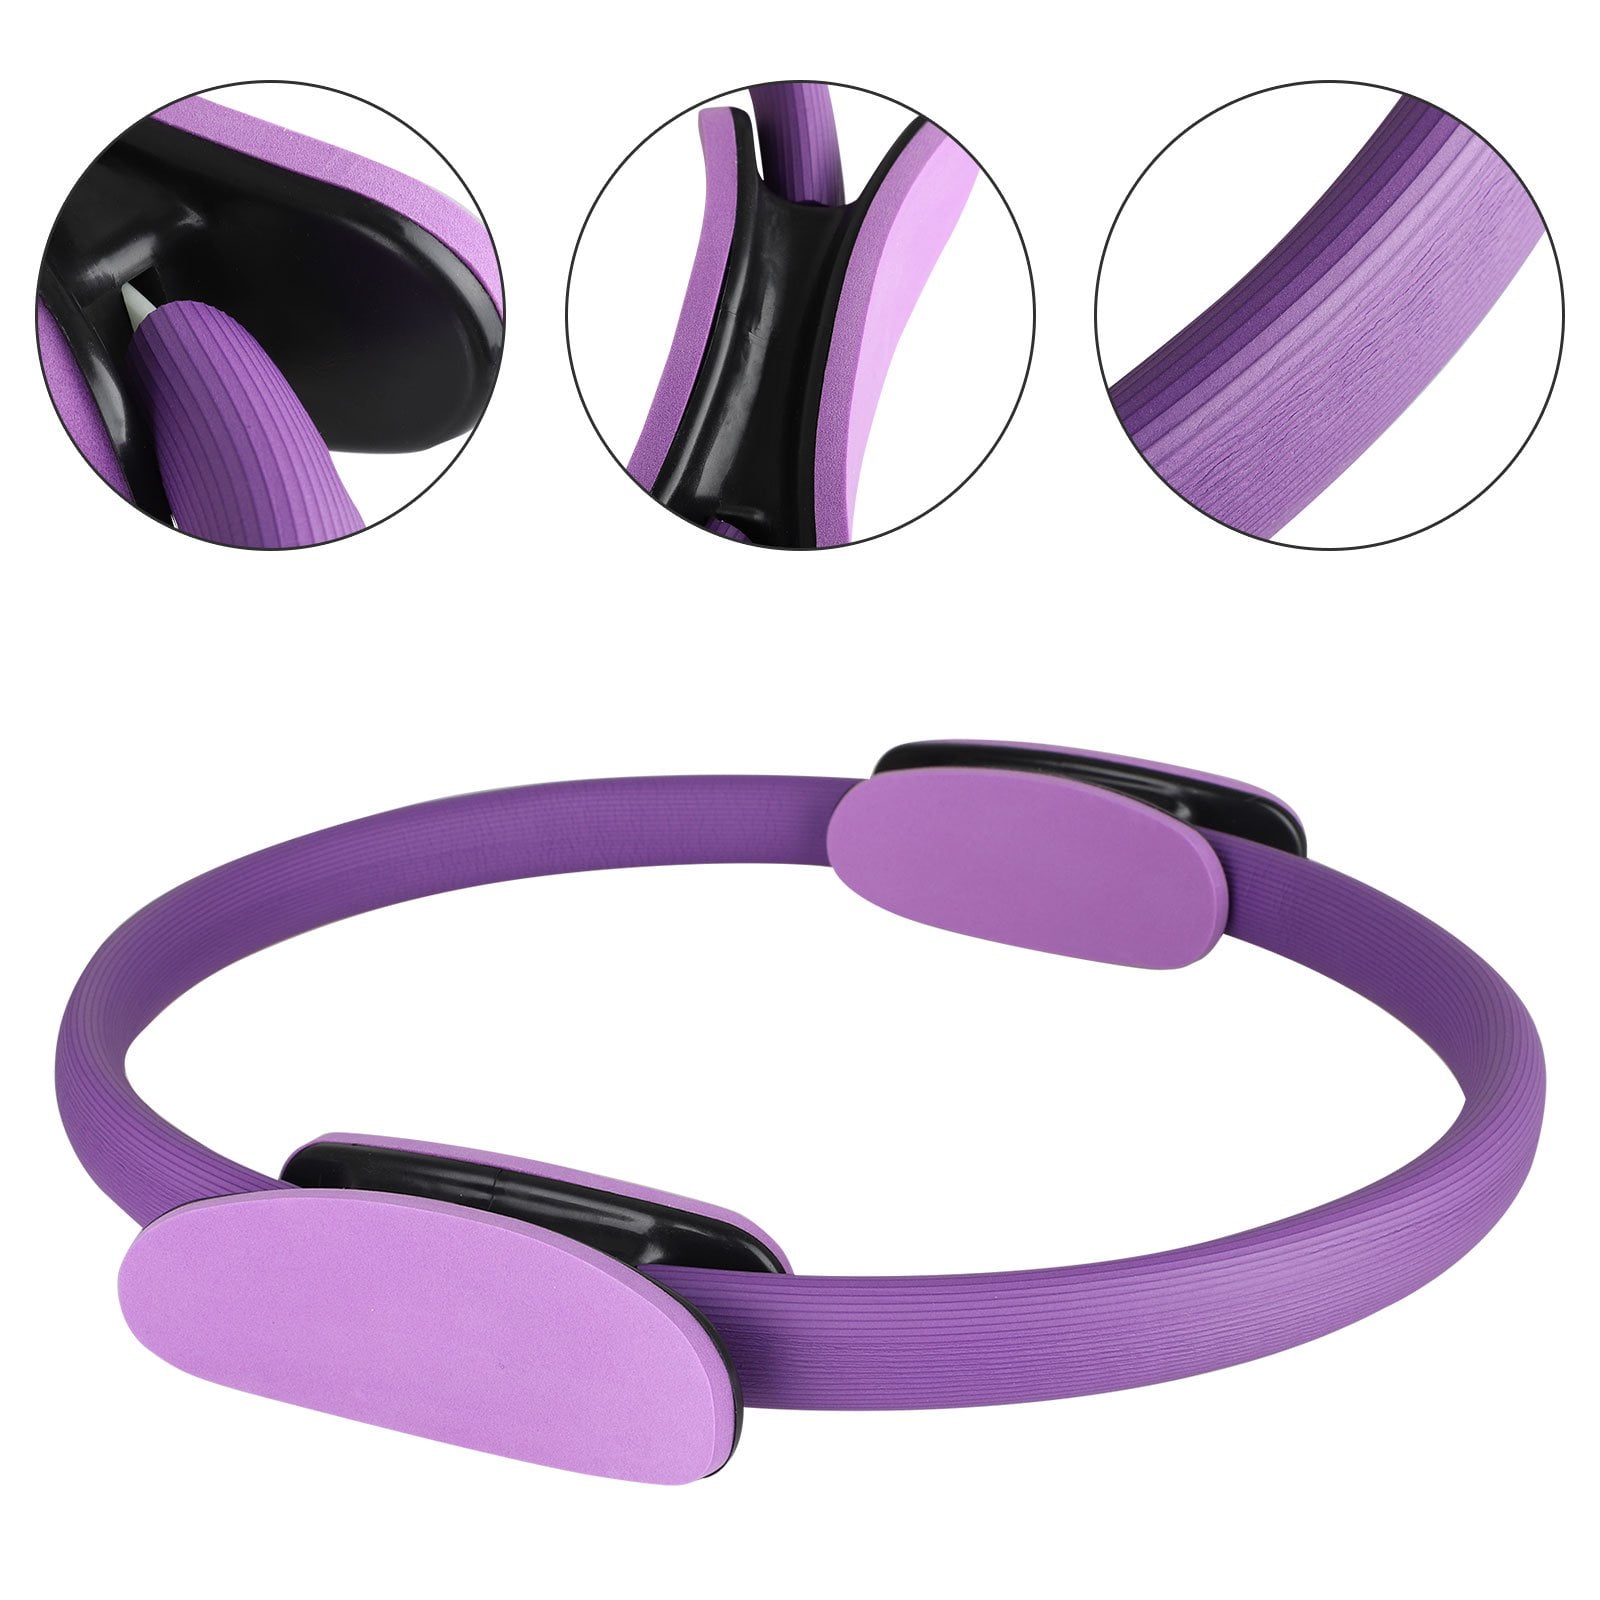 Pilates Circle Ring Dual Grip Fitness Weight Exercise Yoga Body Gym Trainer Tool 